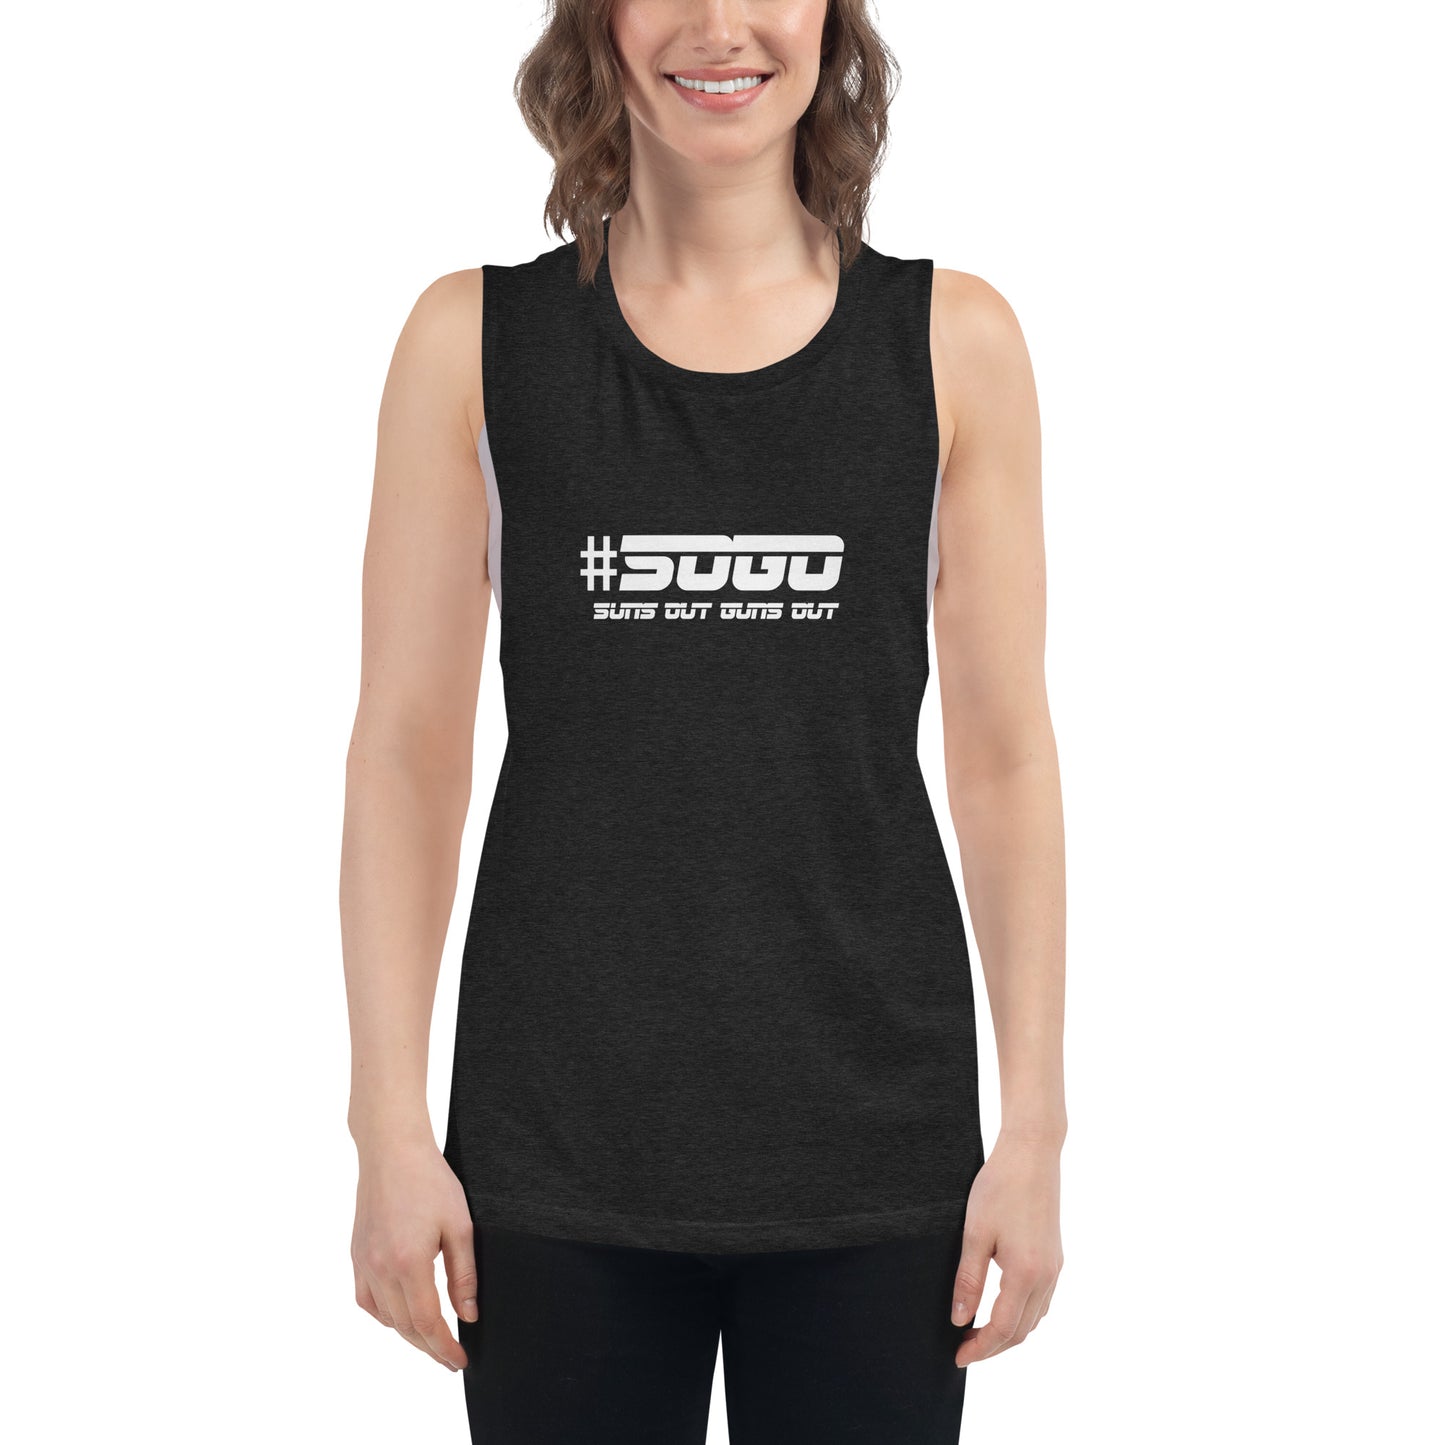 Snooty Fox Art Ladies’ Muscle Tank - SOGO (Suns out Guns out)